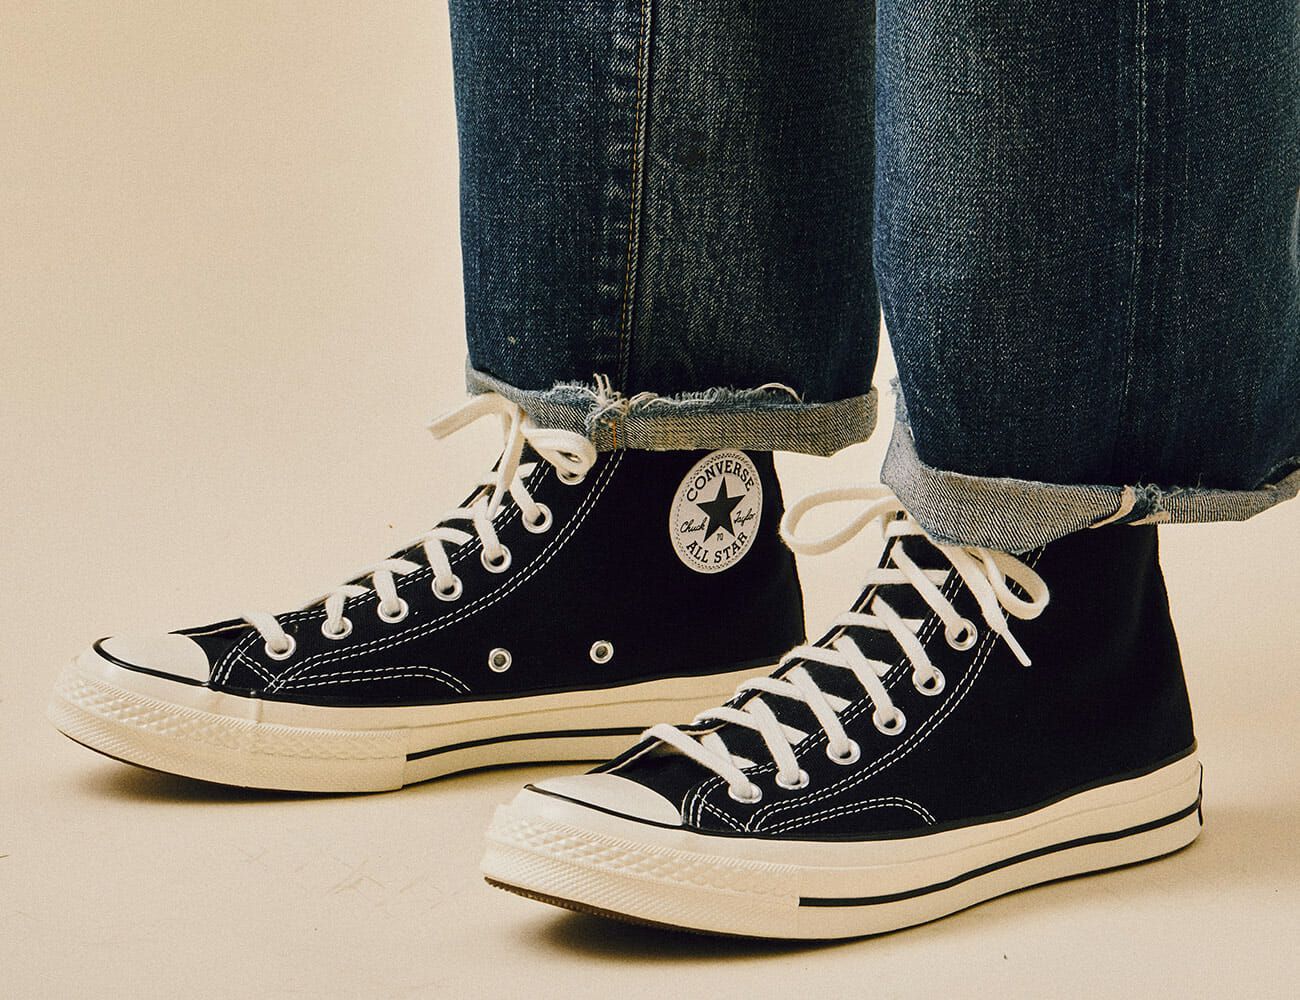 Converse Classic Chucks vs. Chuck 70s: Which Pair Should You Get? ياللي